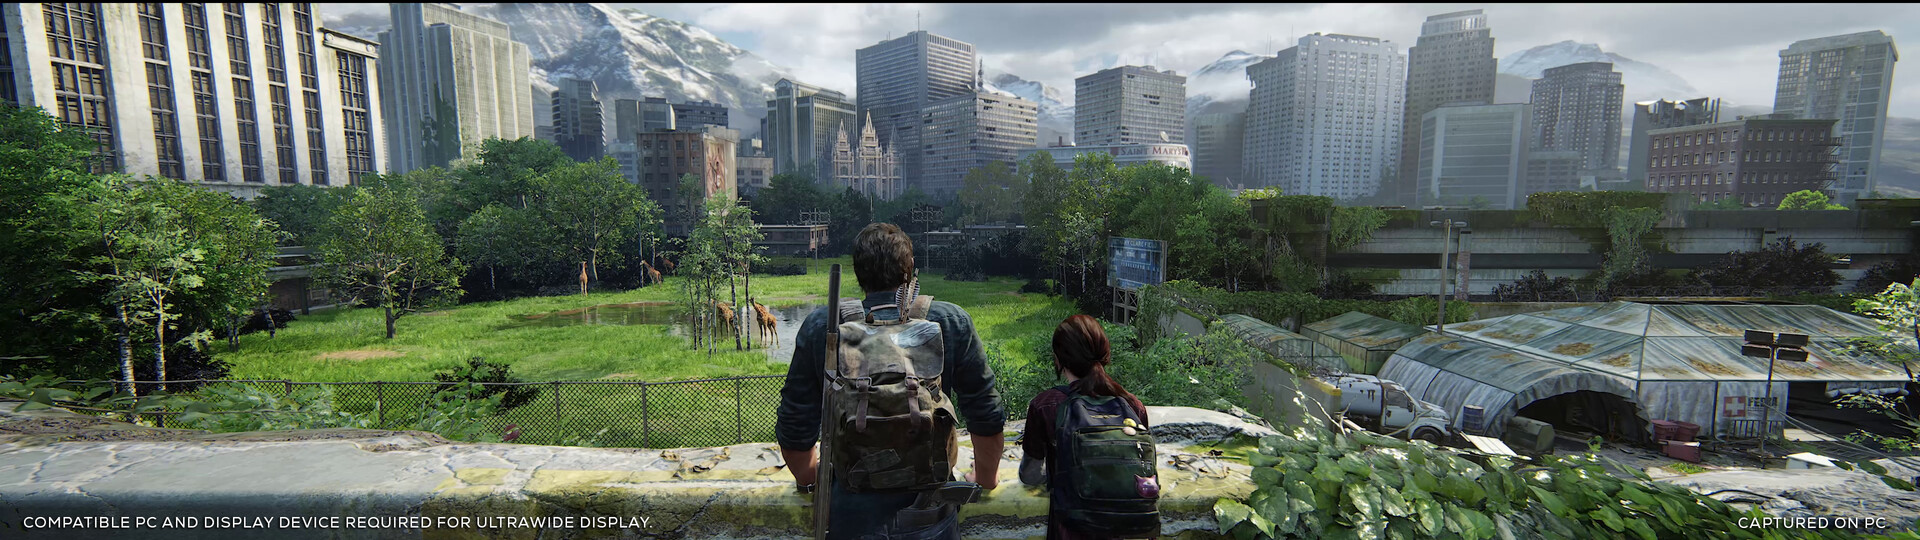 1920x1080 The Last Of Us Wallpaper Background Image. View